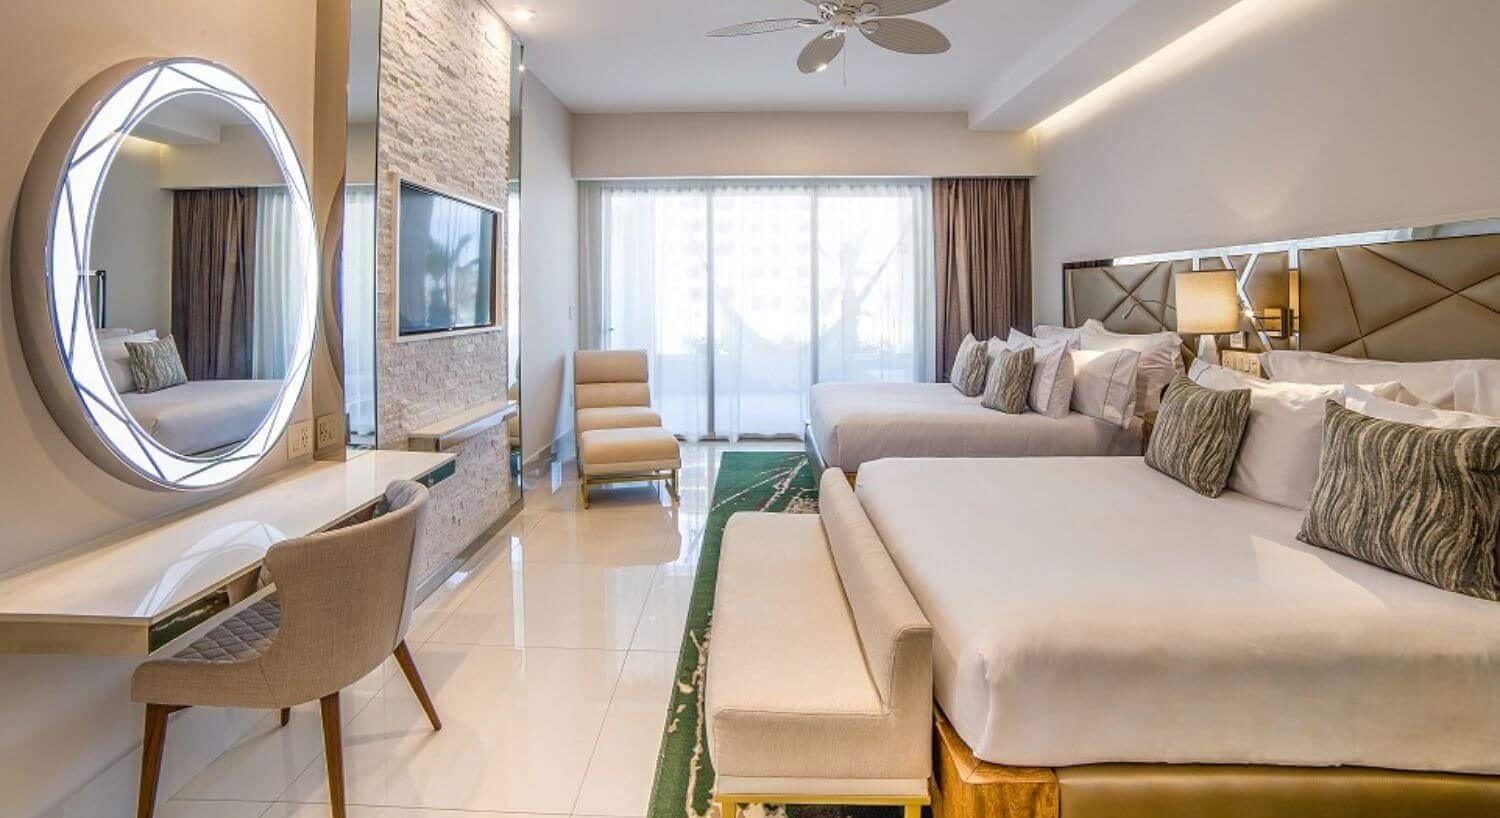 A bedroom with 2 queen beds, a sitting bench at the foot of one bed, a writing desk and chair with mirror on the opposite wall, along with a flat screen TV and chaise lounge, and sliding doors that lead out to a private balcony with patio furniture and hammock.